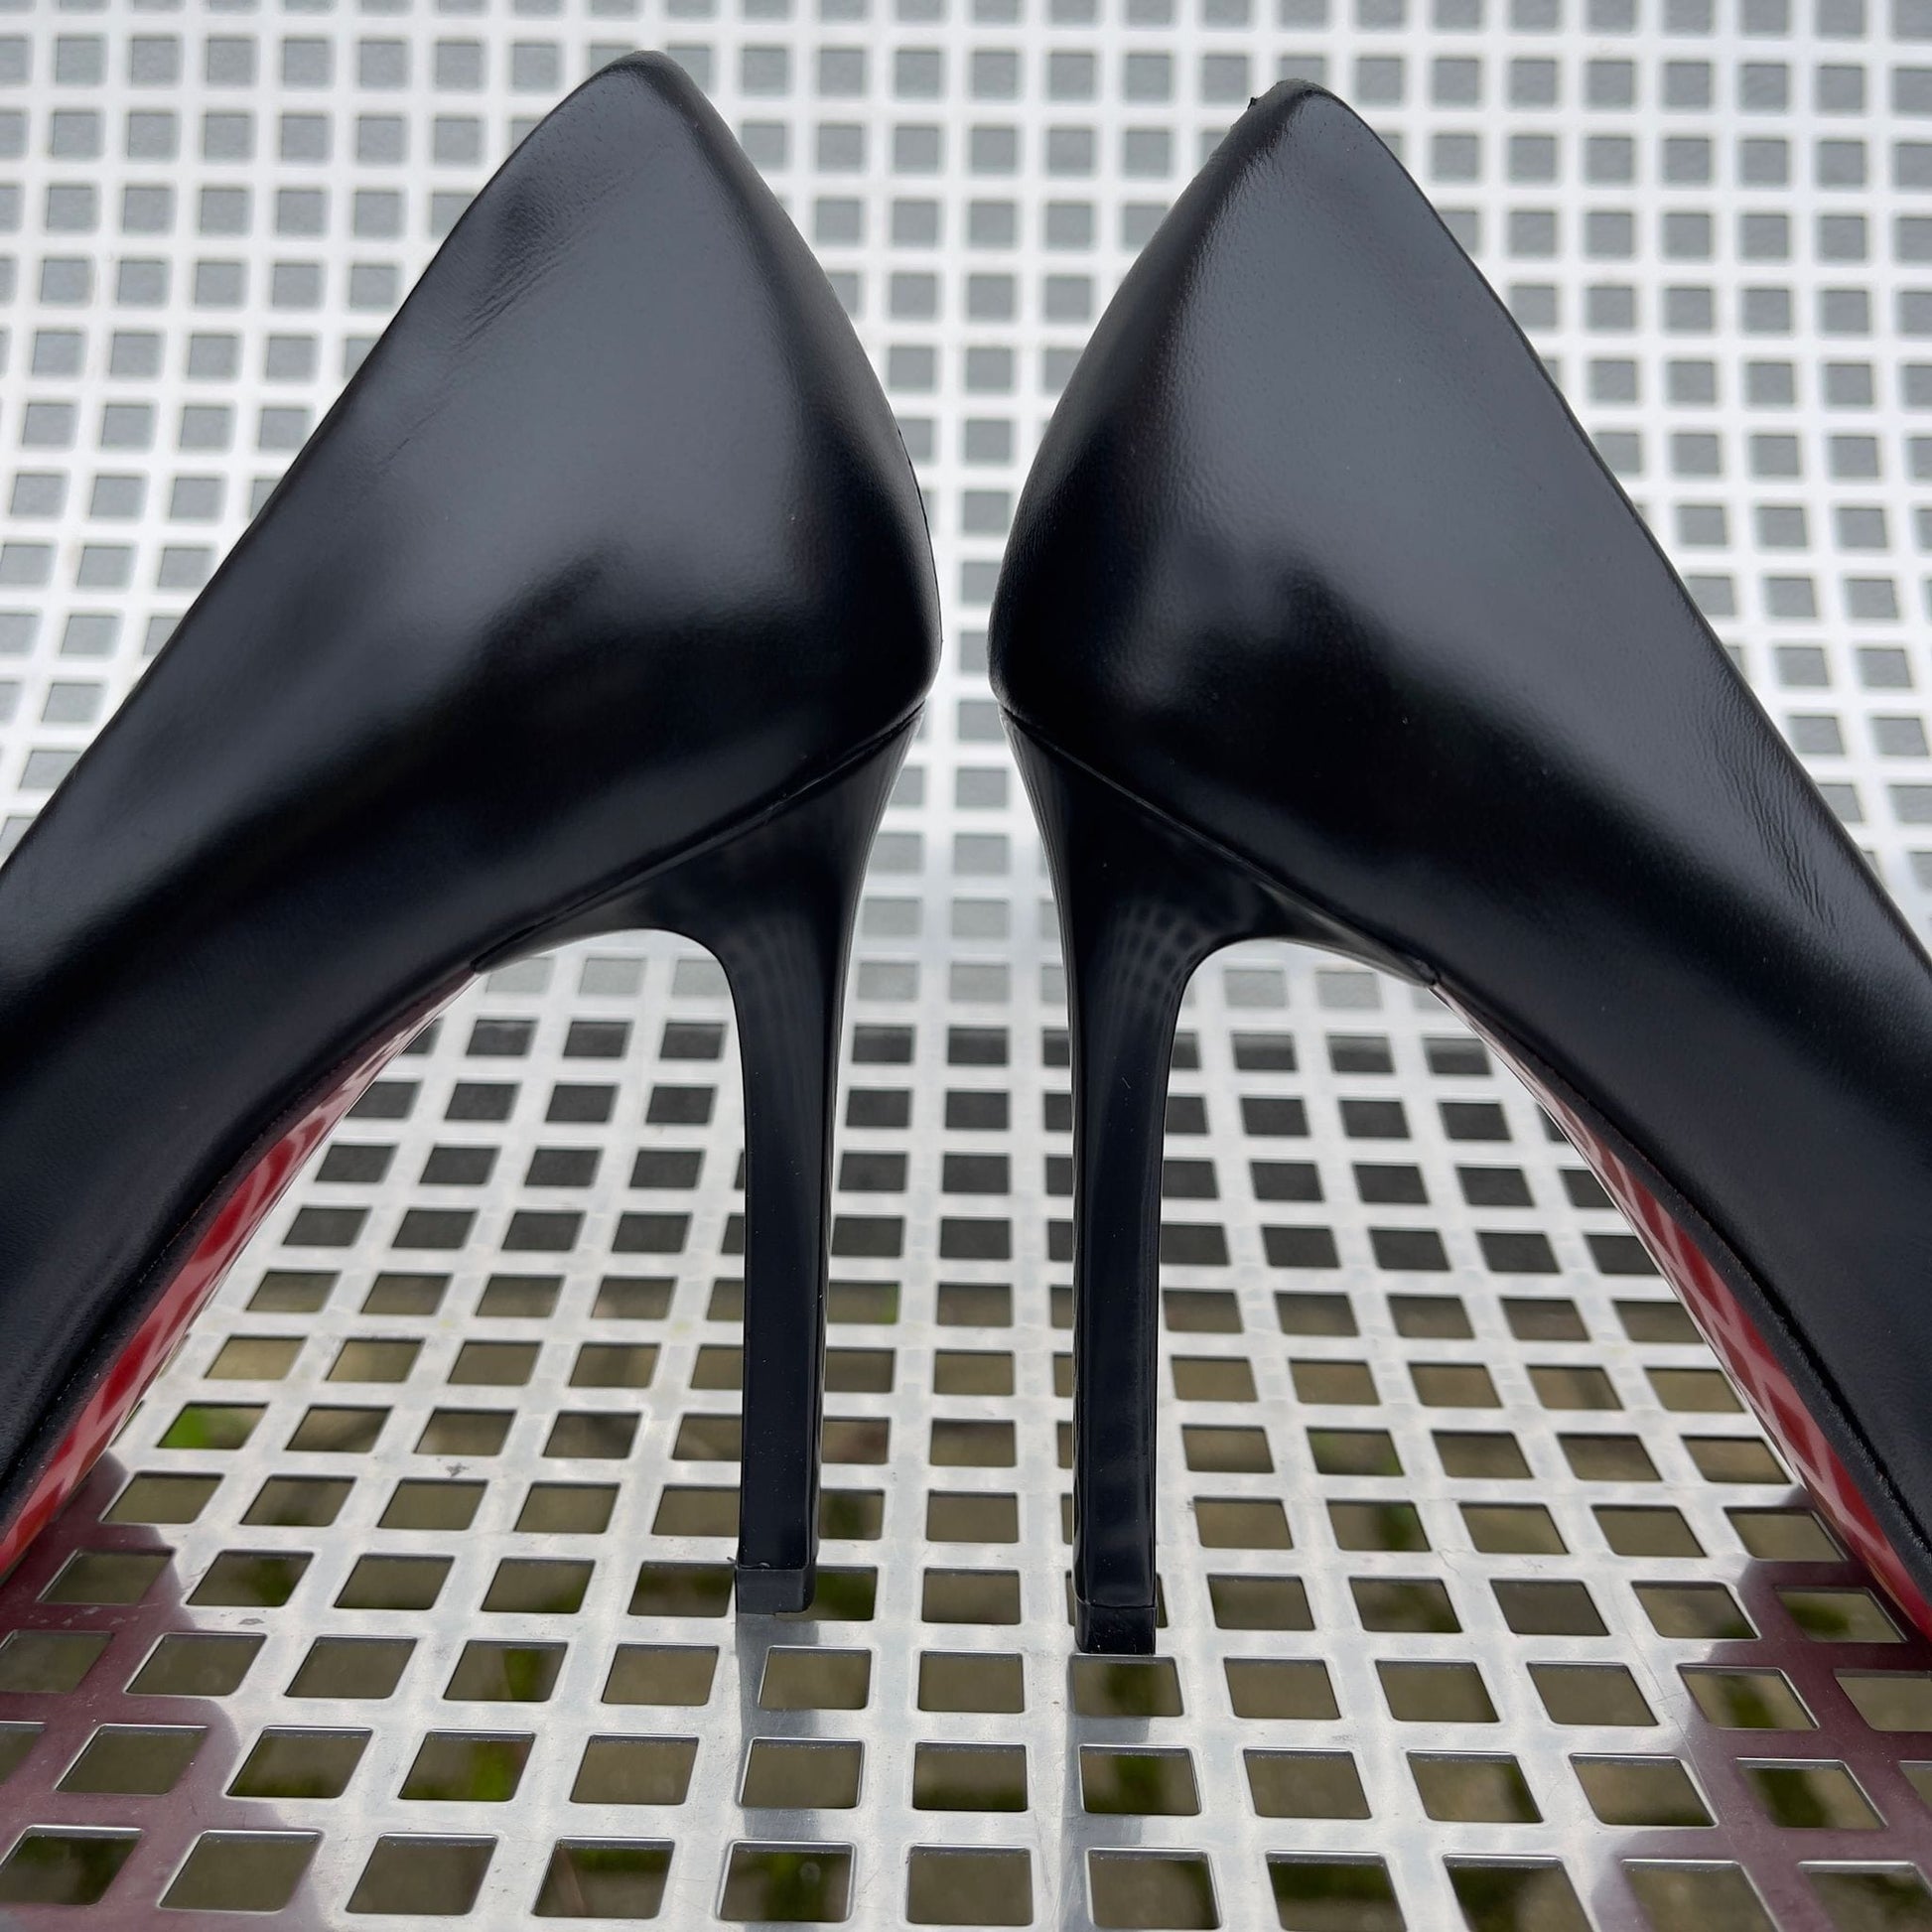 High stiletto court shoes with red sole